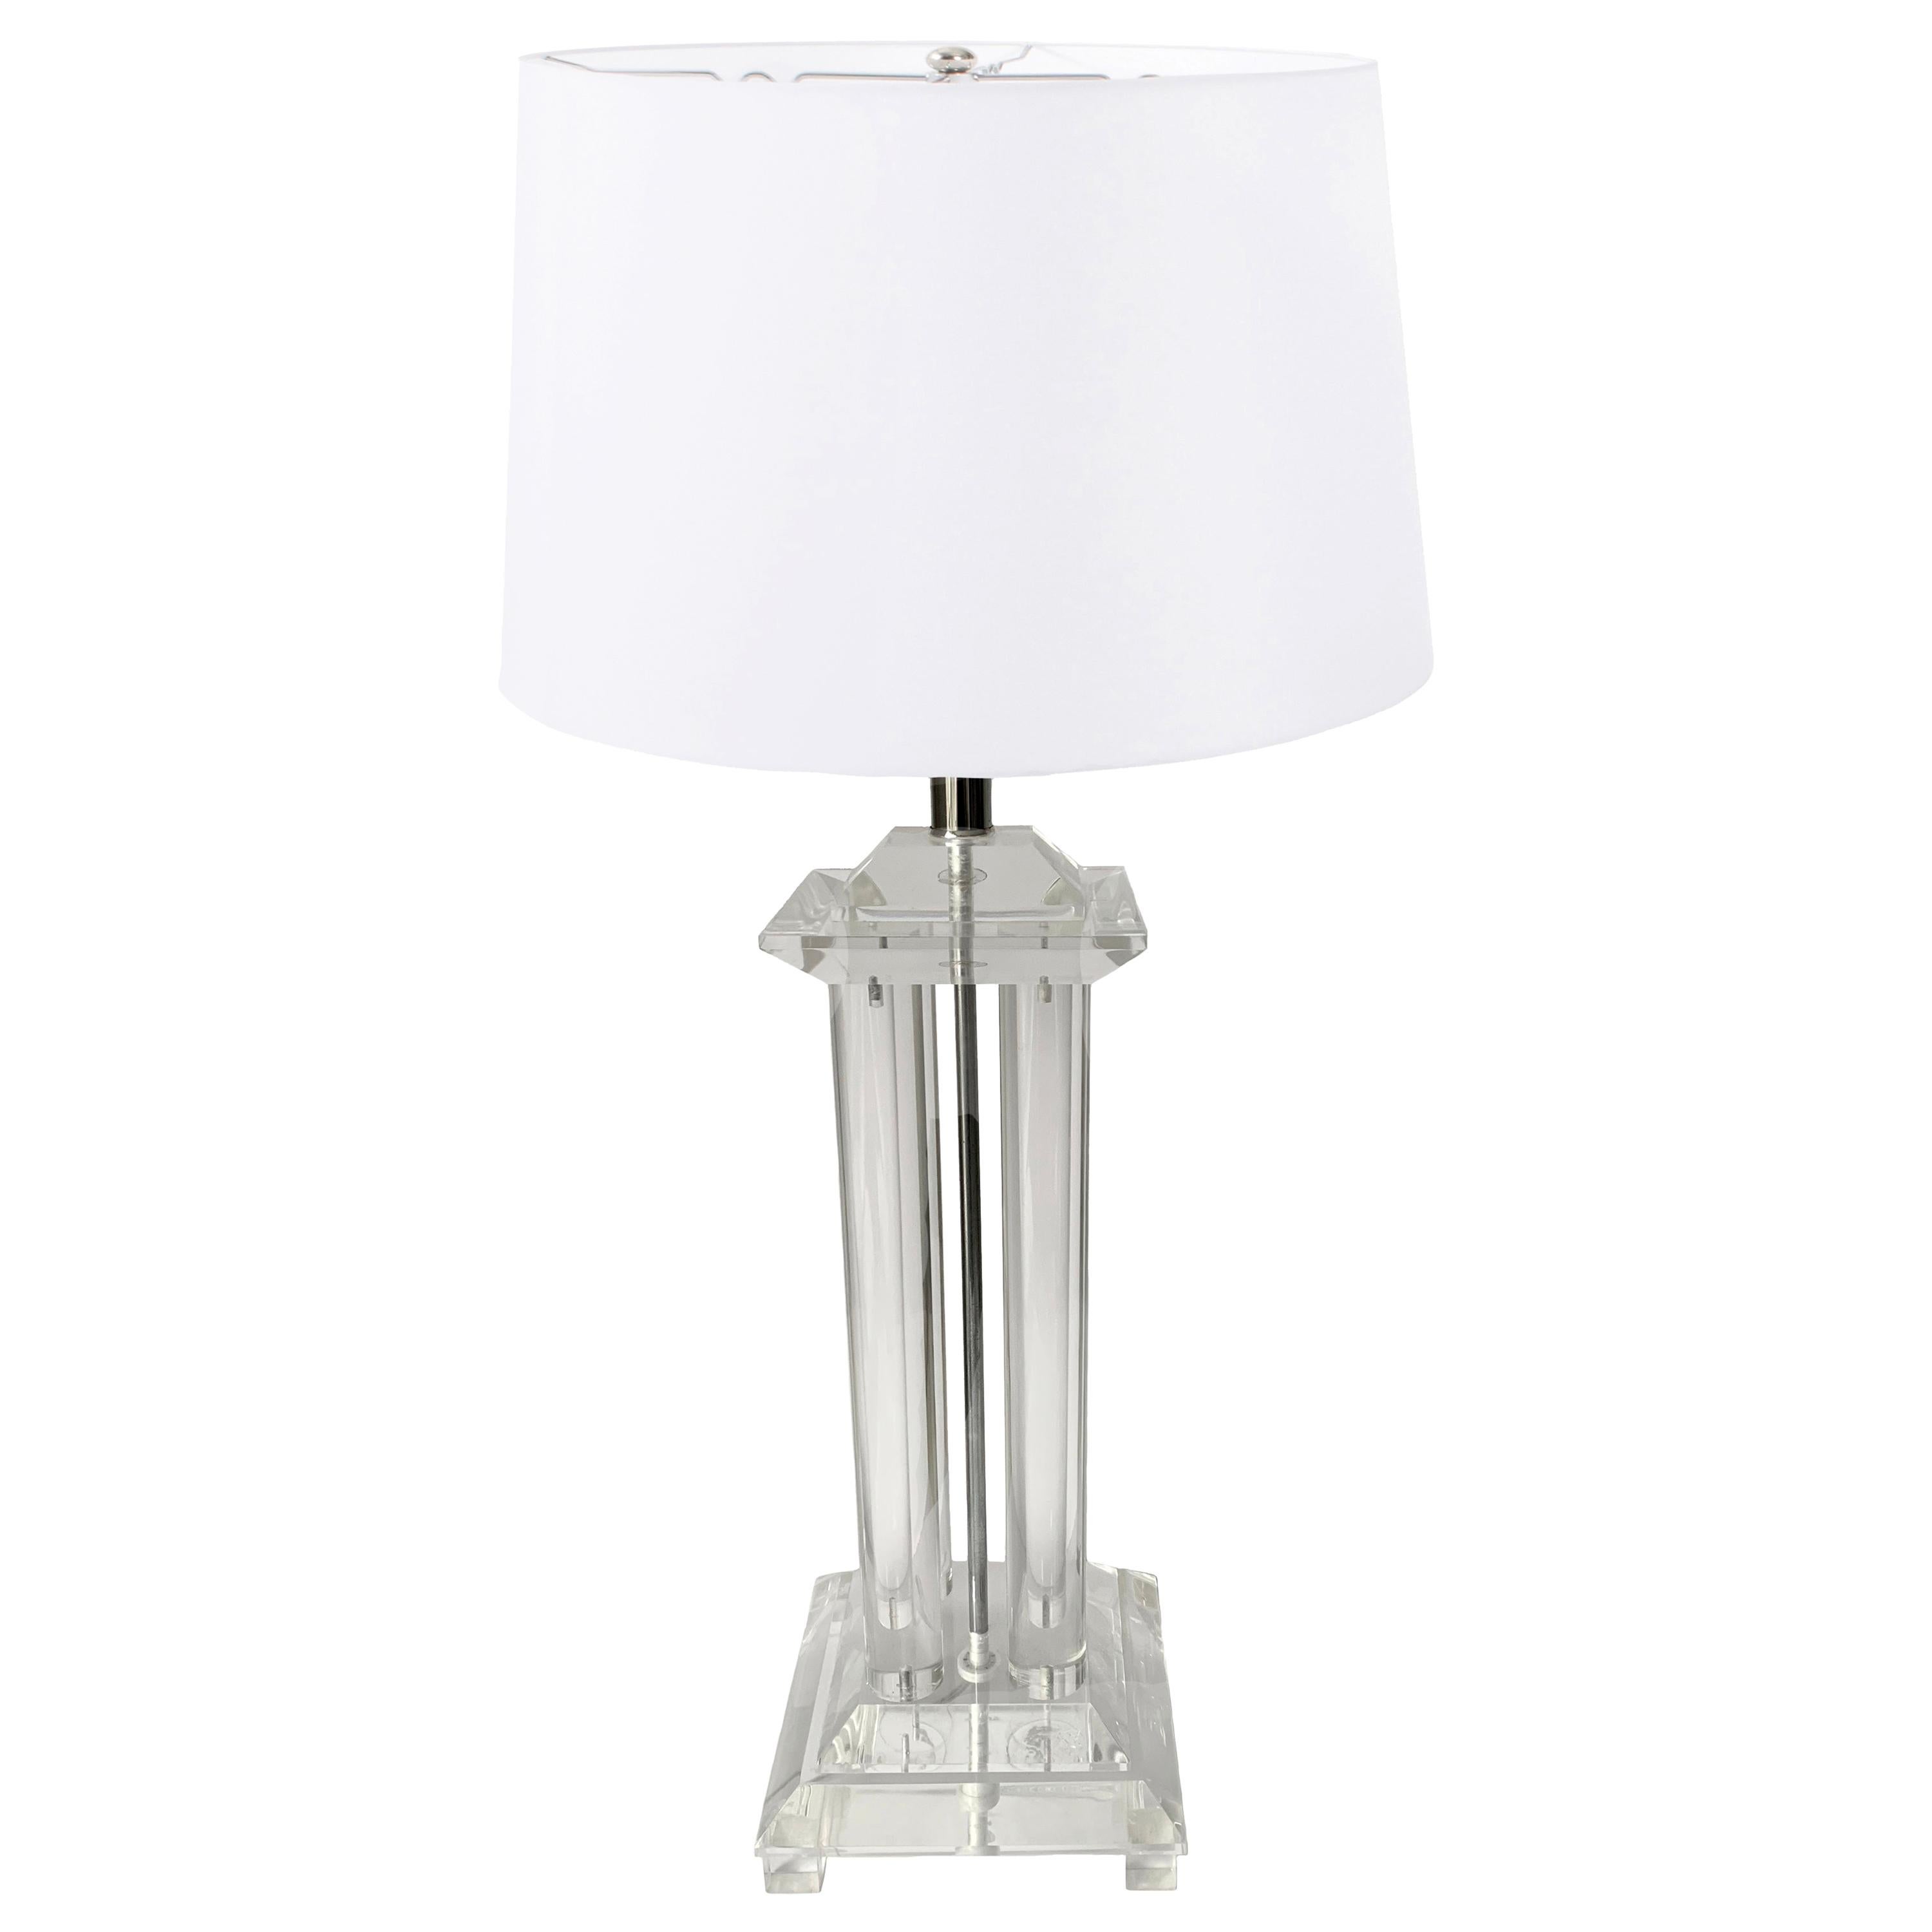 Large Lucite Column Table Lamp For Sale